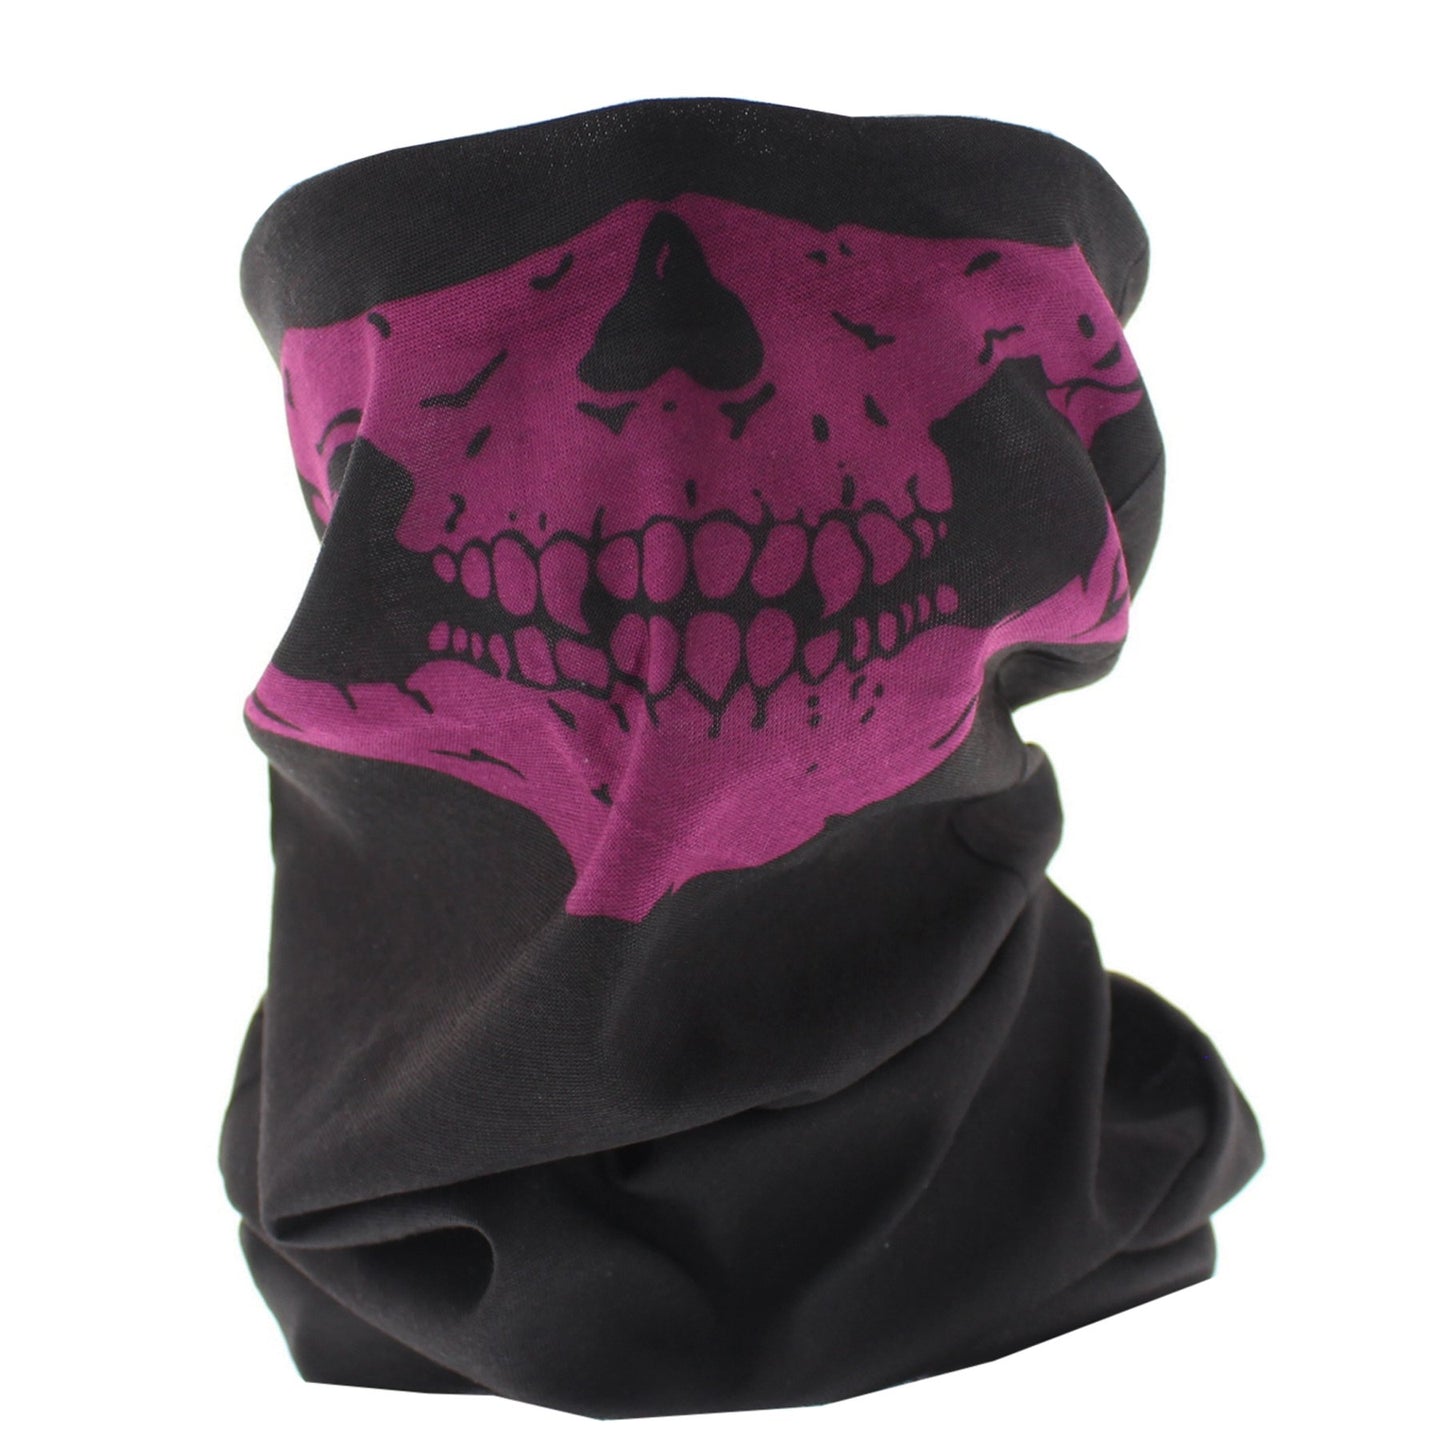 Black+Purple Skeleton Mouth Snood/Face Covering